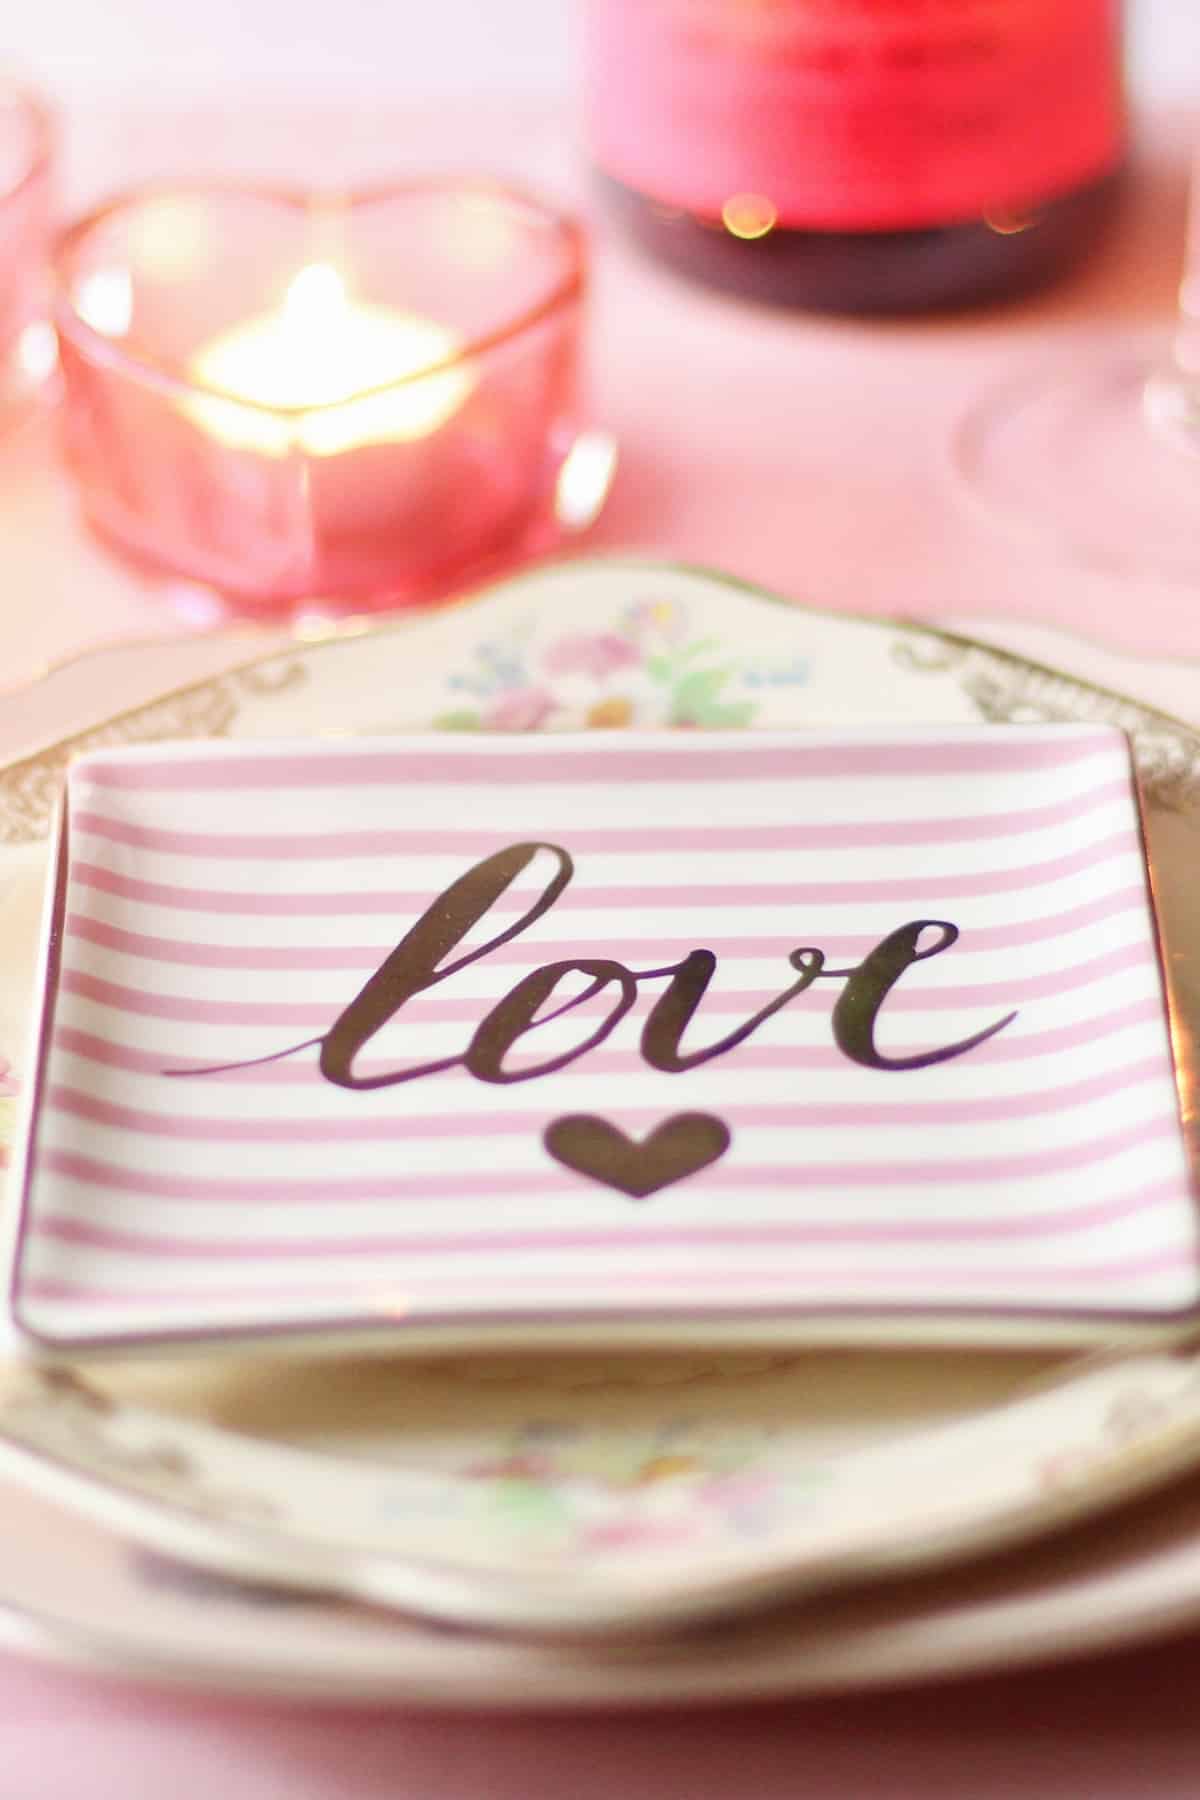 A small plate that says "love" on a table next to a candle.